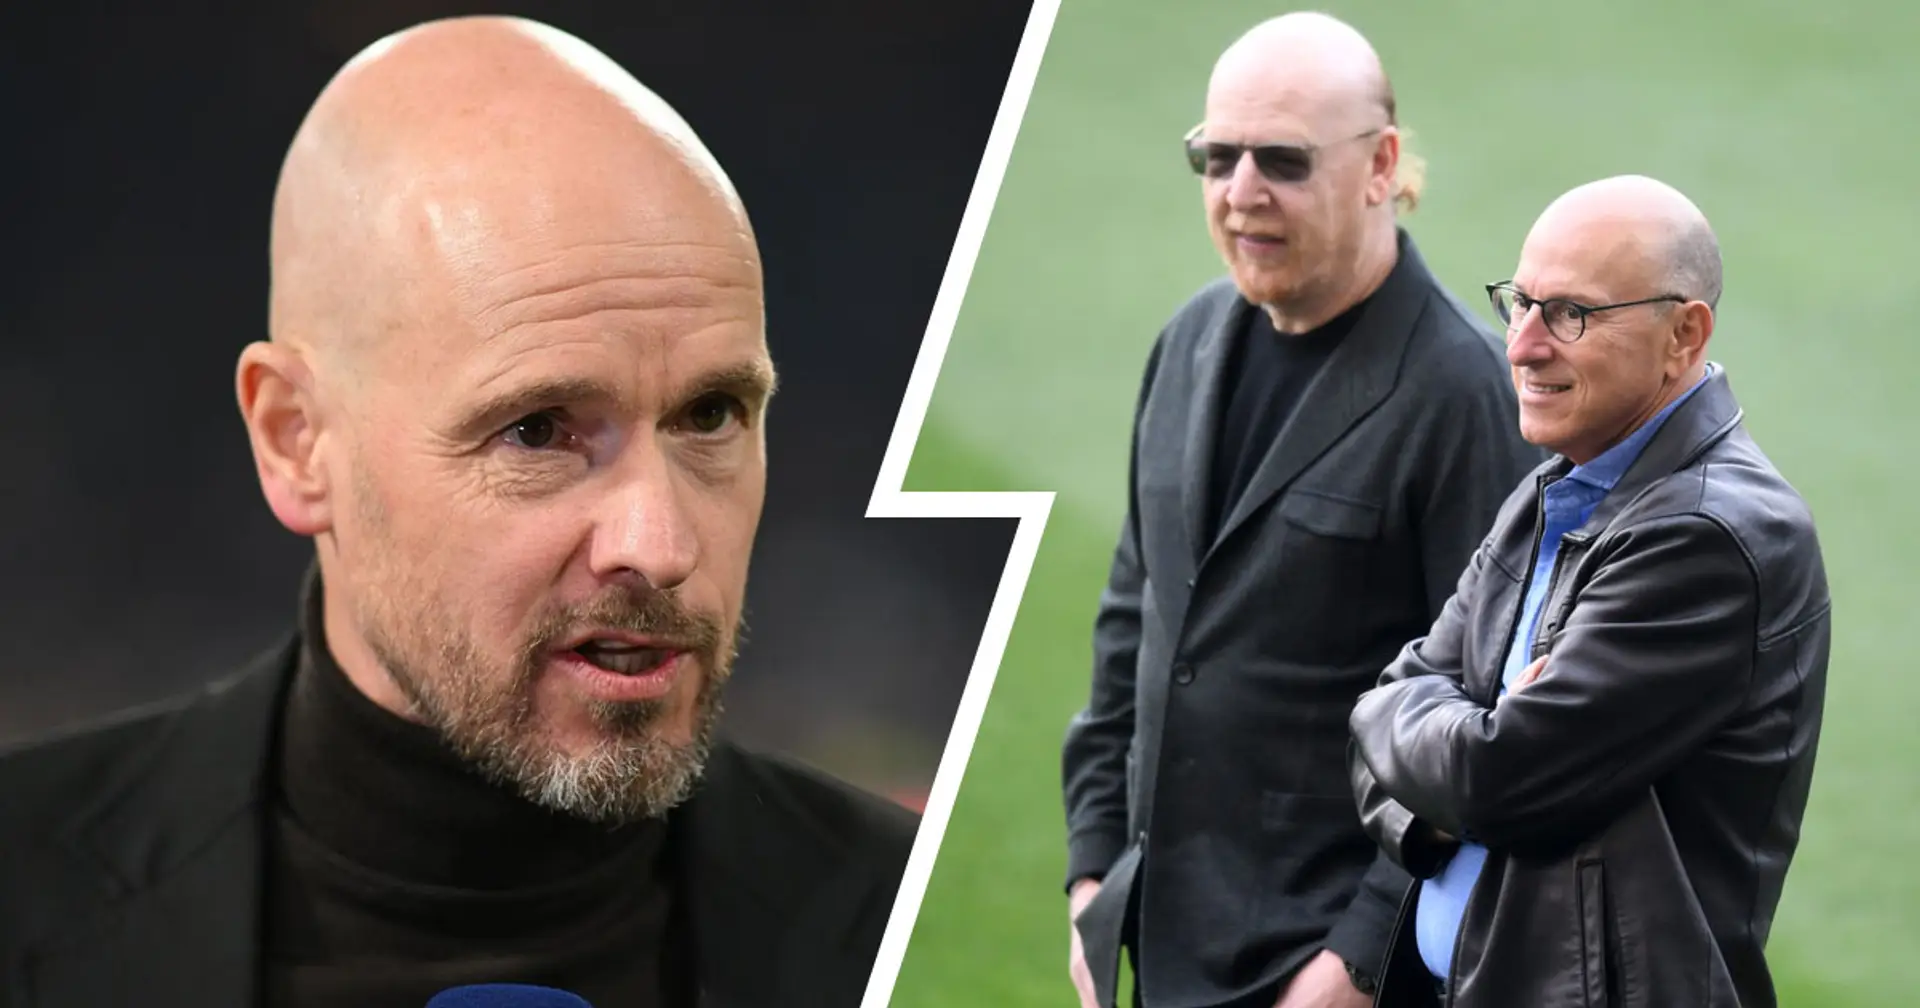 'I don't want to be a ruler, but..': Ten Hag reveals conditions he set before agreeing United manager role